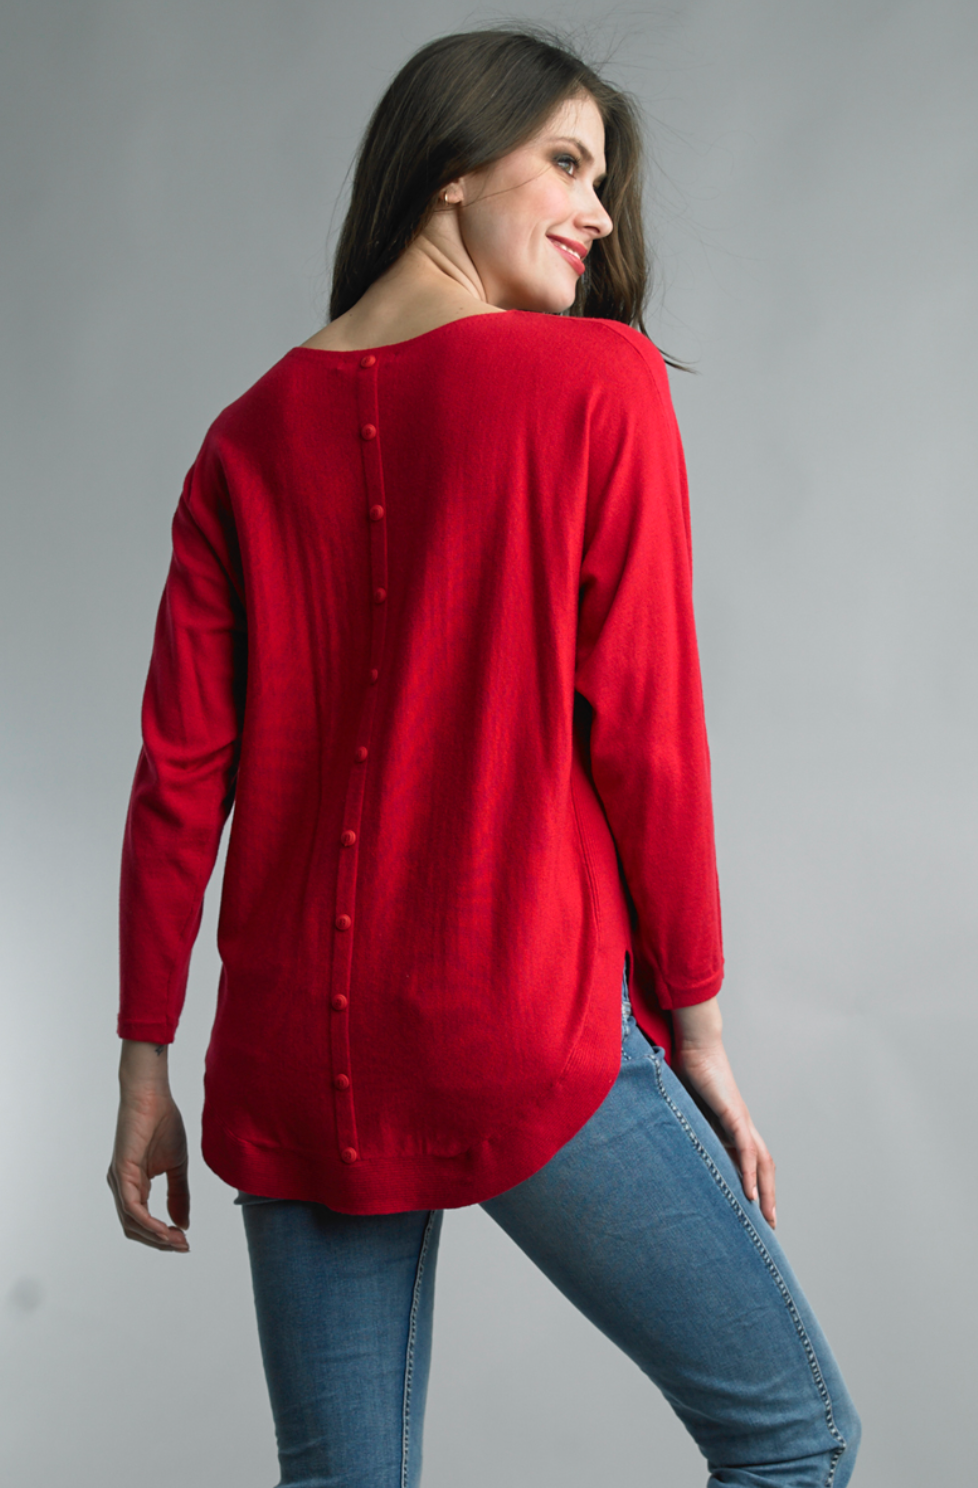 Bailey Button Back Sweater, Red